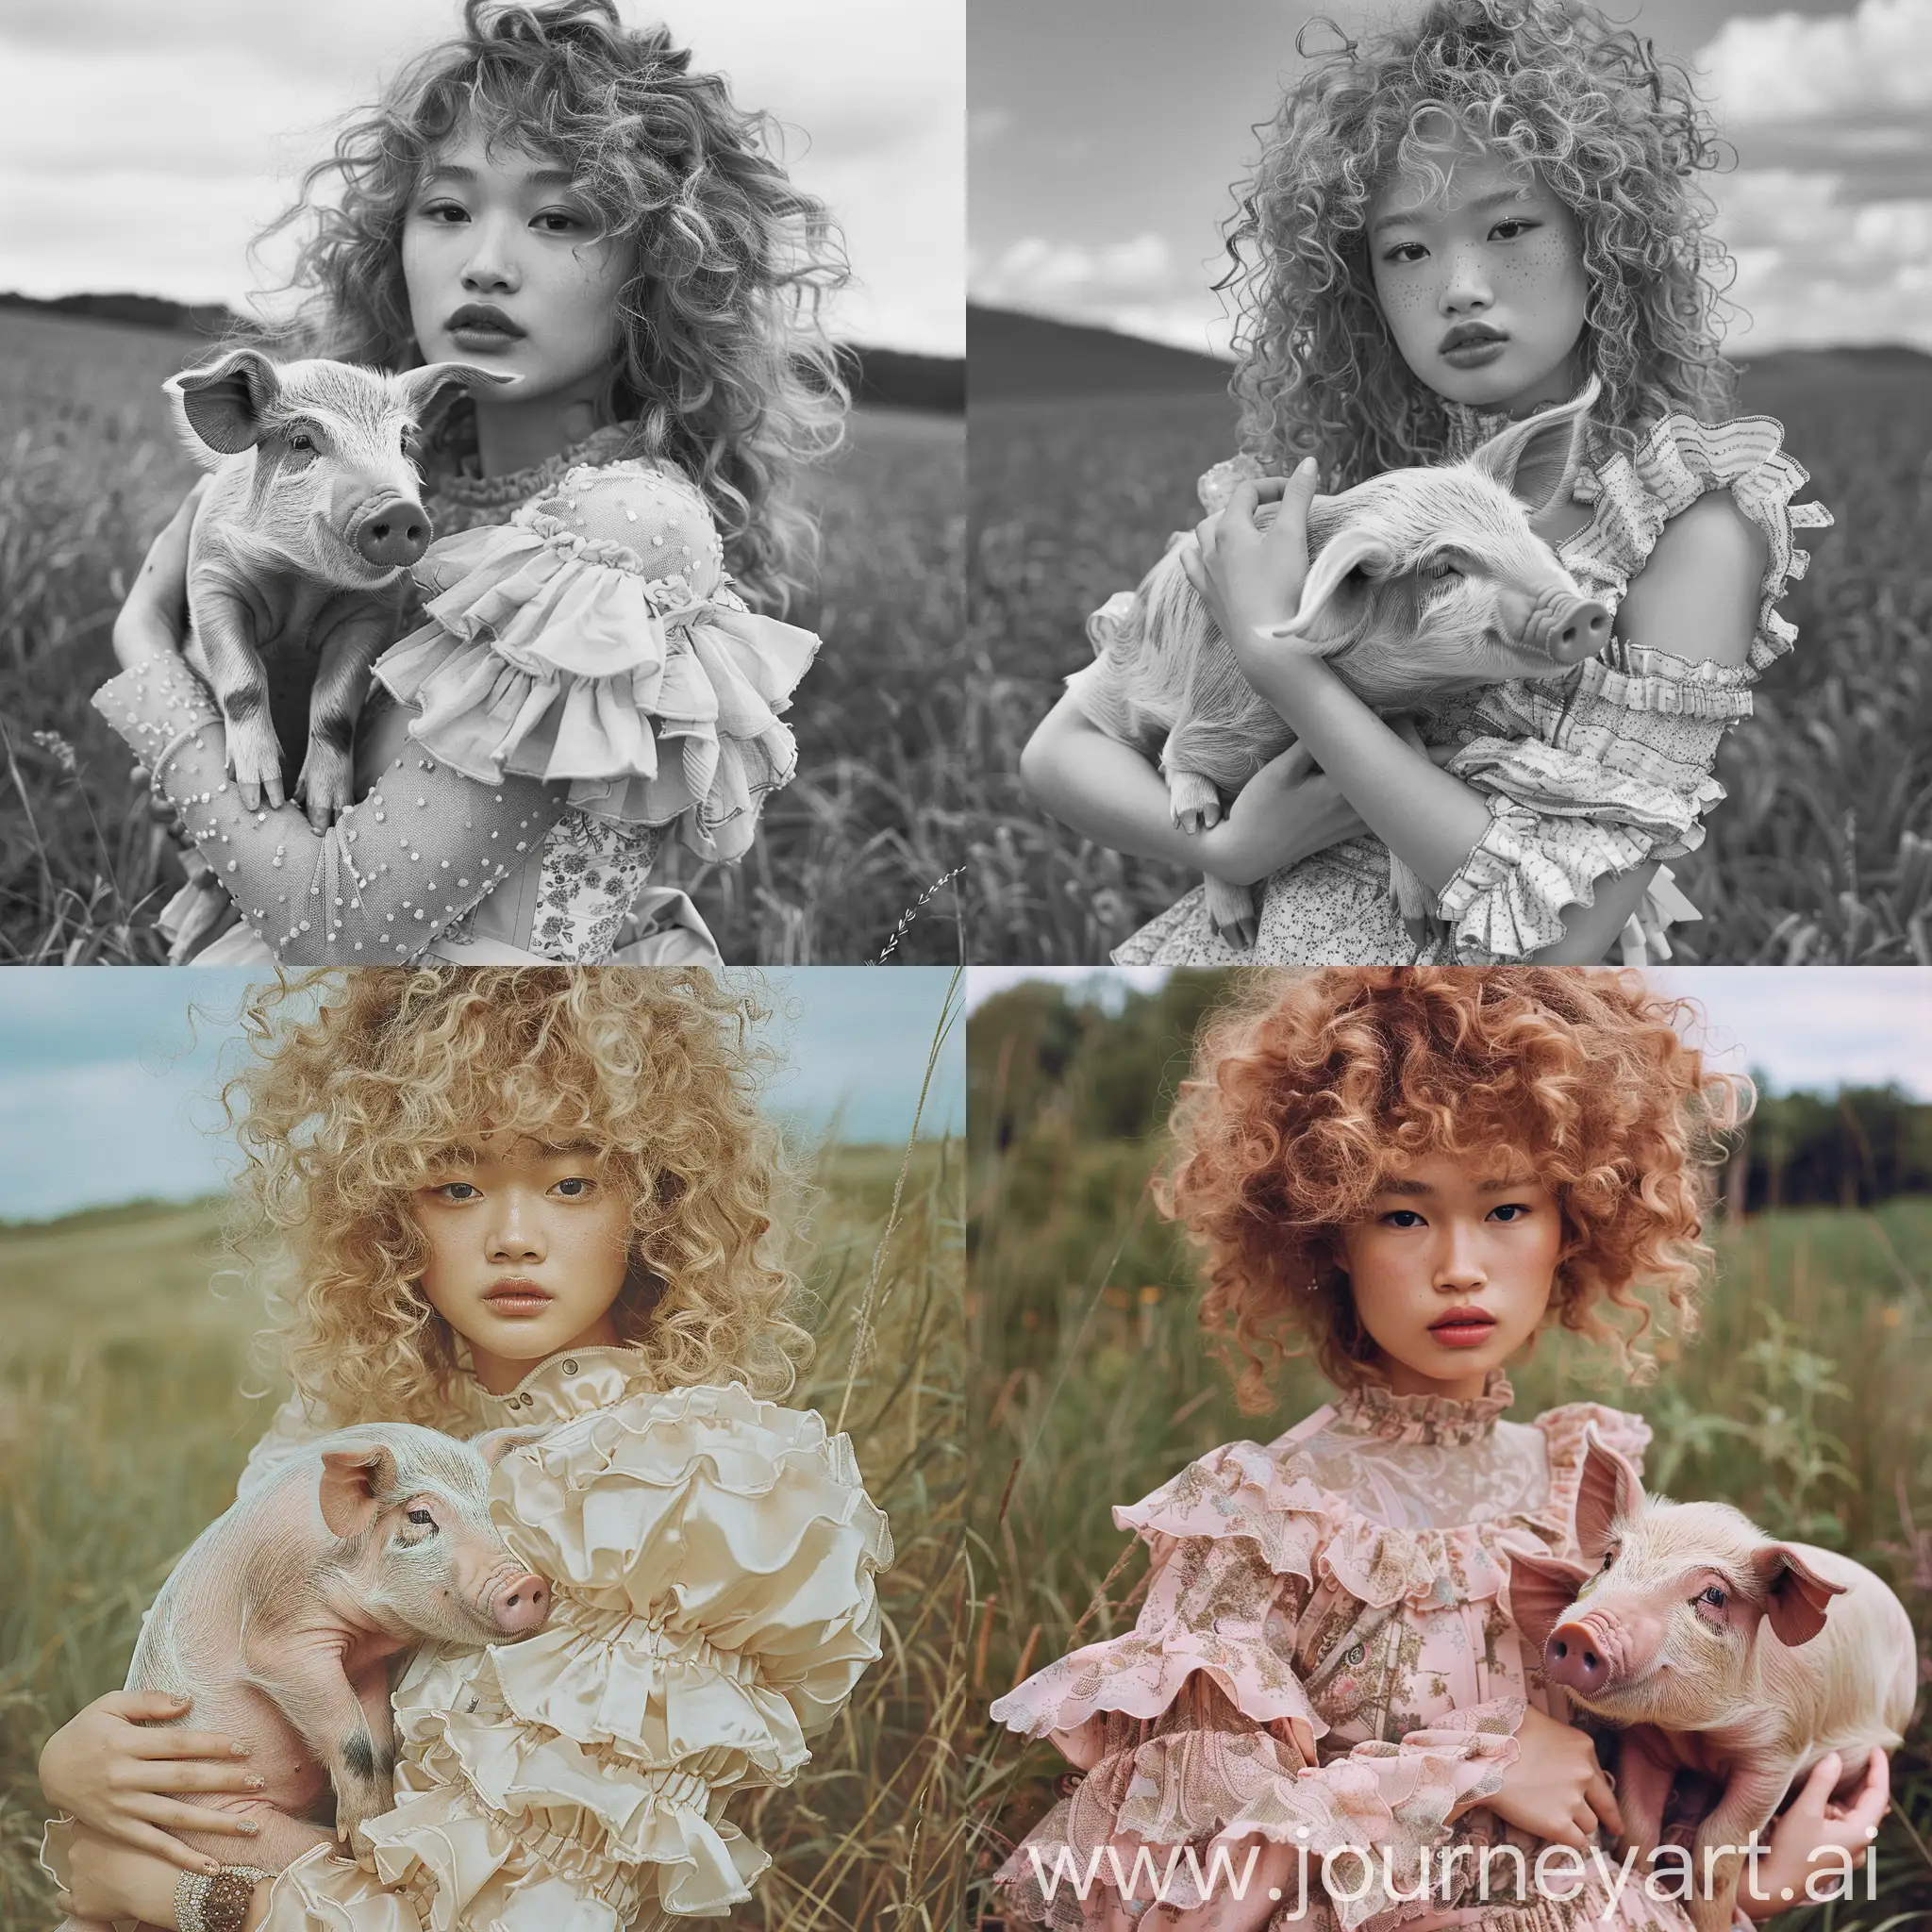 Japanese-Girl-Holding-Piglet-in-Ruffled-Dress-High-Fashion-Editorial-Photoshoot